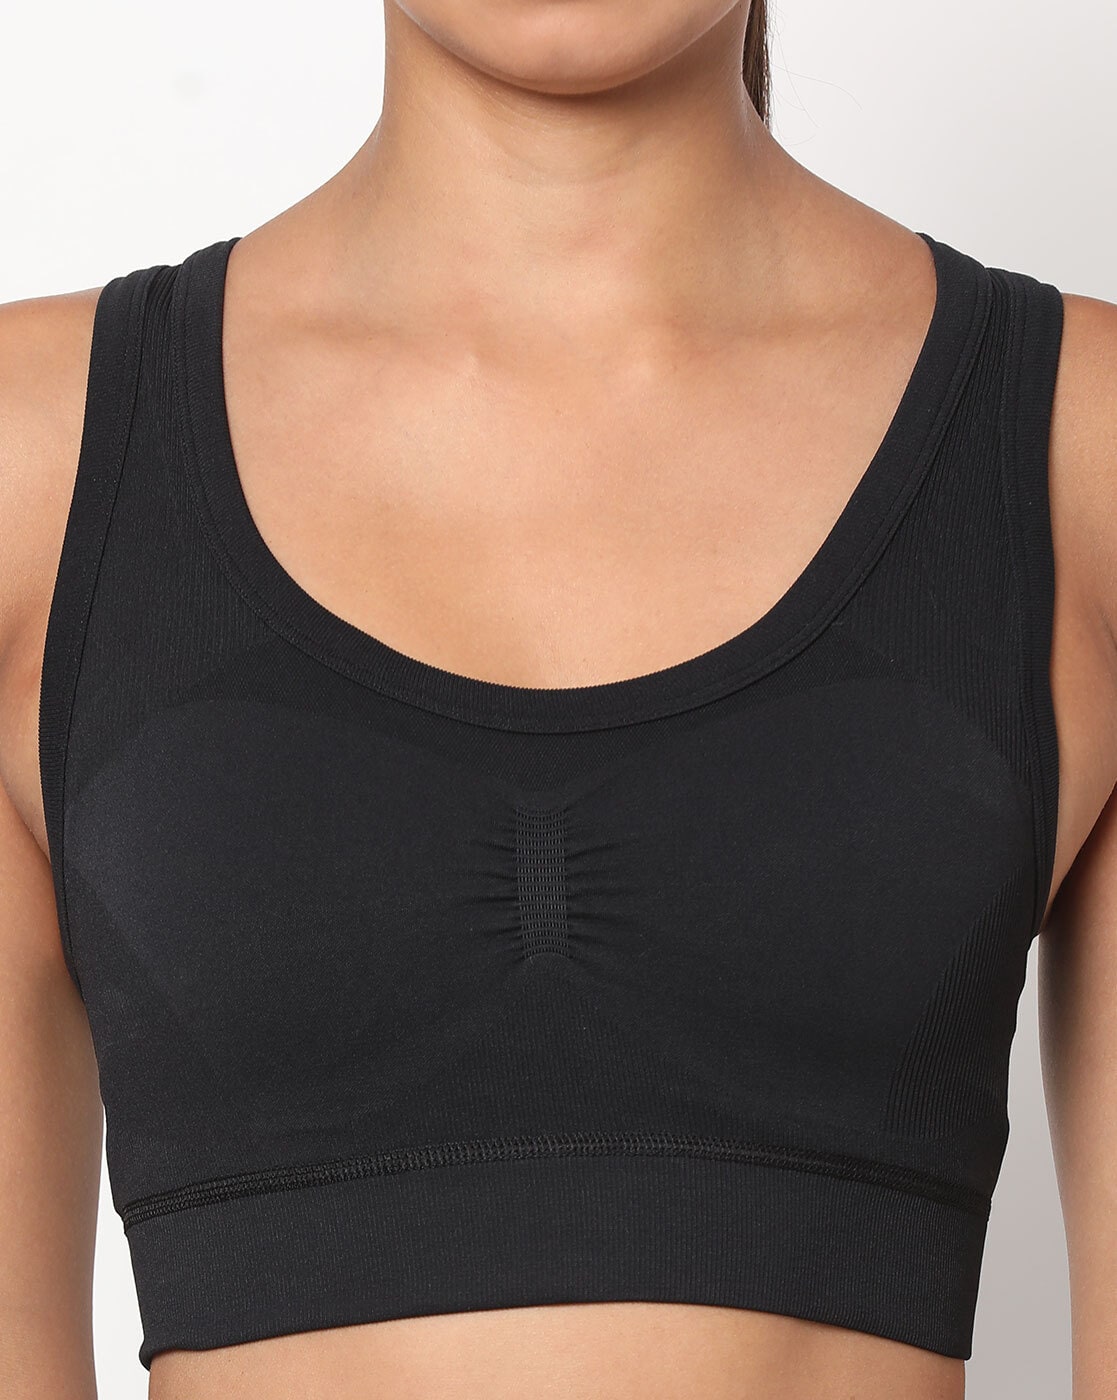 Buy Black Bras for Women by ADIDAS Online